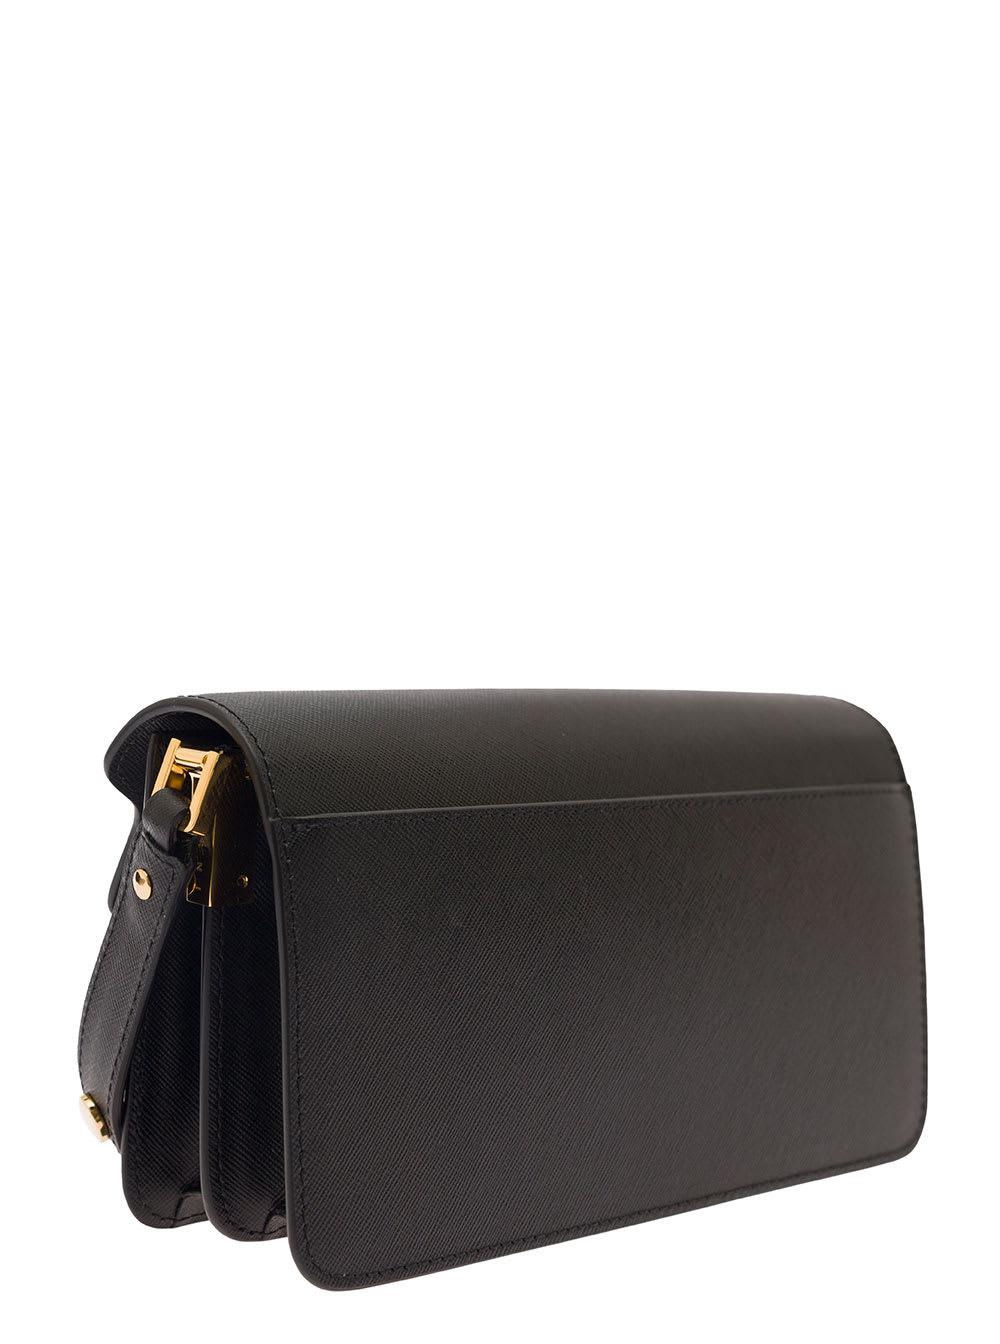 Marni Trunk' Shoulder Bag With Push-lock Fastening In Leather in